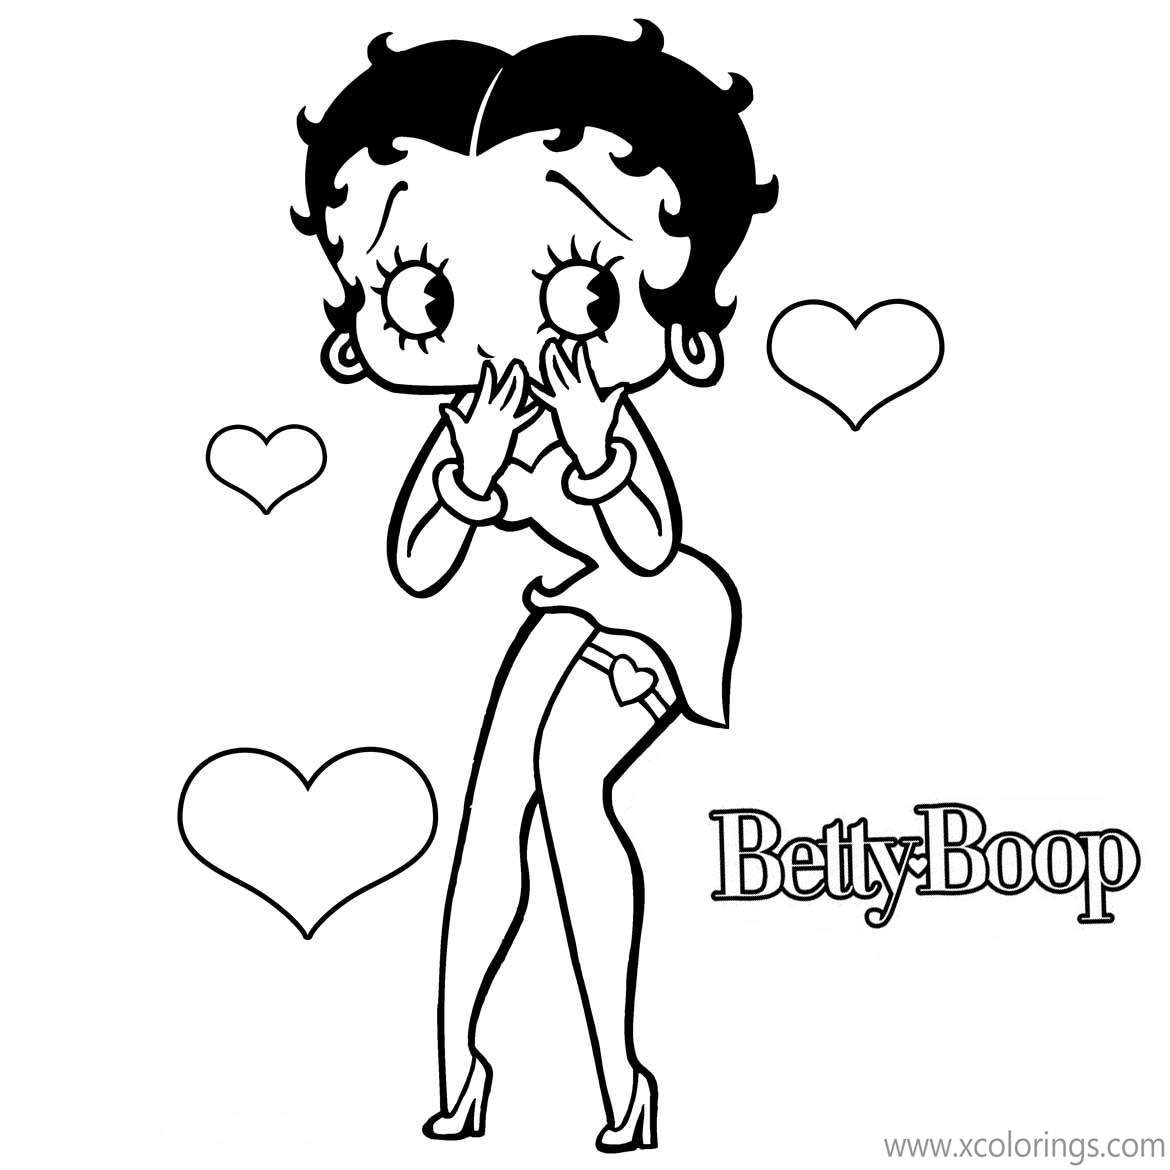 Hawaii Betty Boop Coloring Pages - XColorings.com